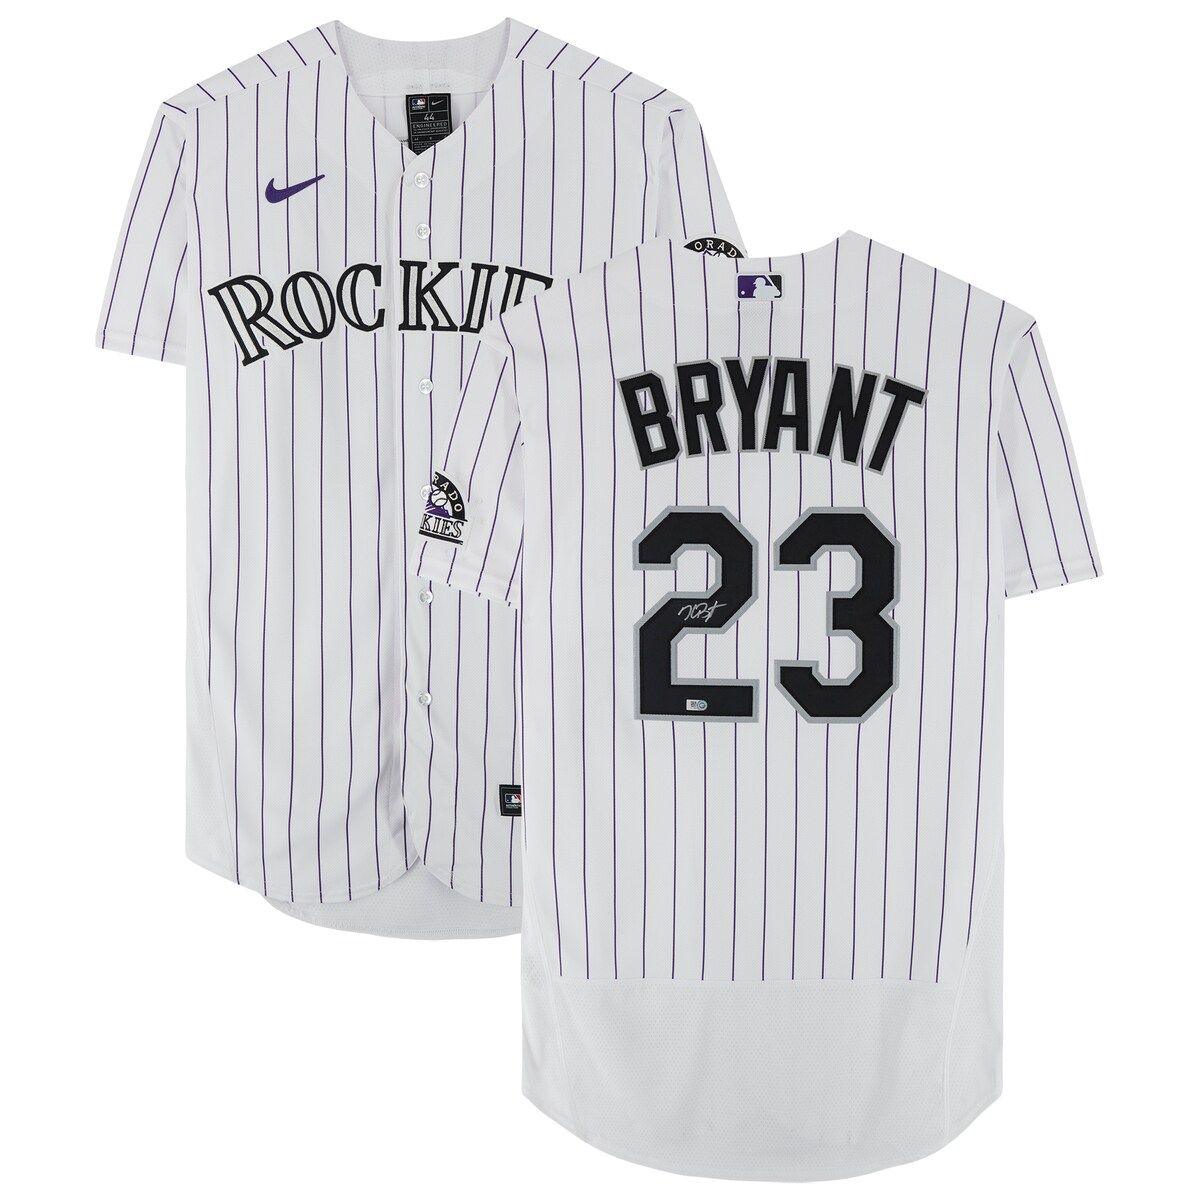 Take your collection of Colorado Rockies memorabilia to the next level by adding this Kris Bryant autographed Nike Authe...